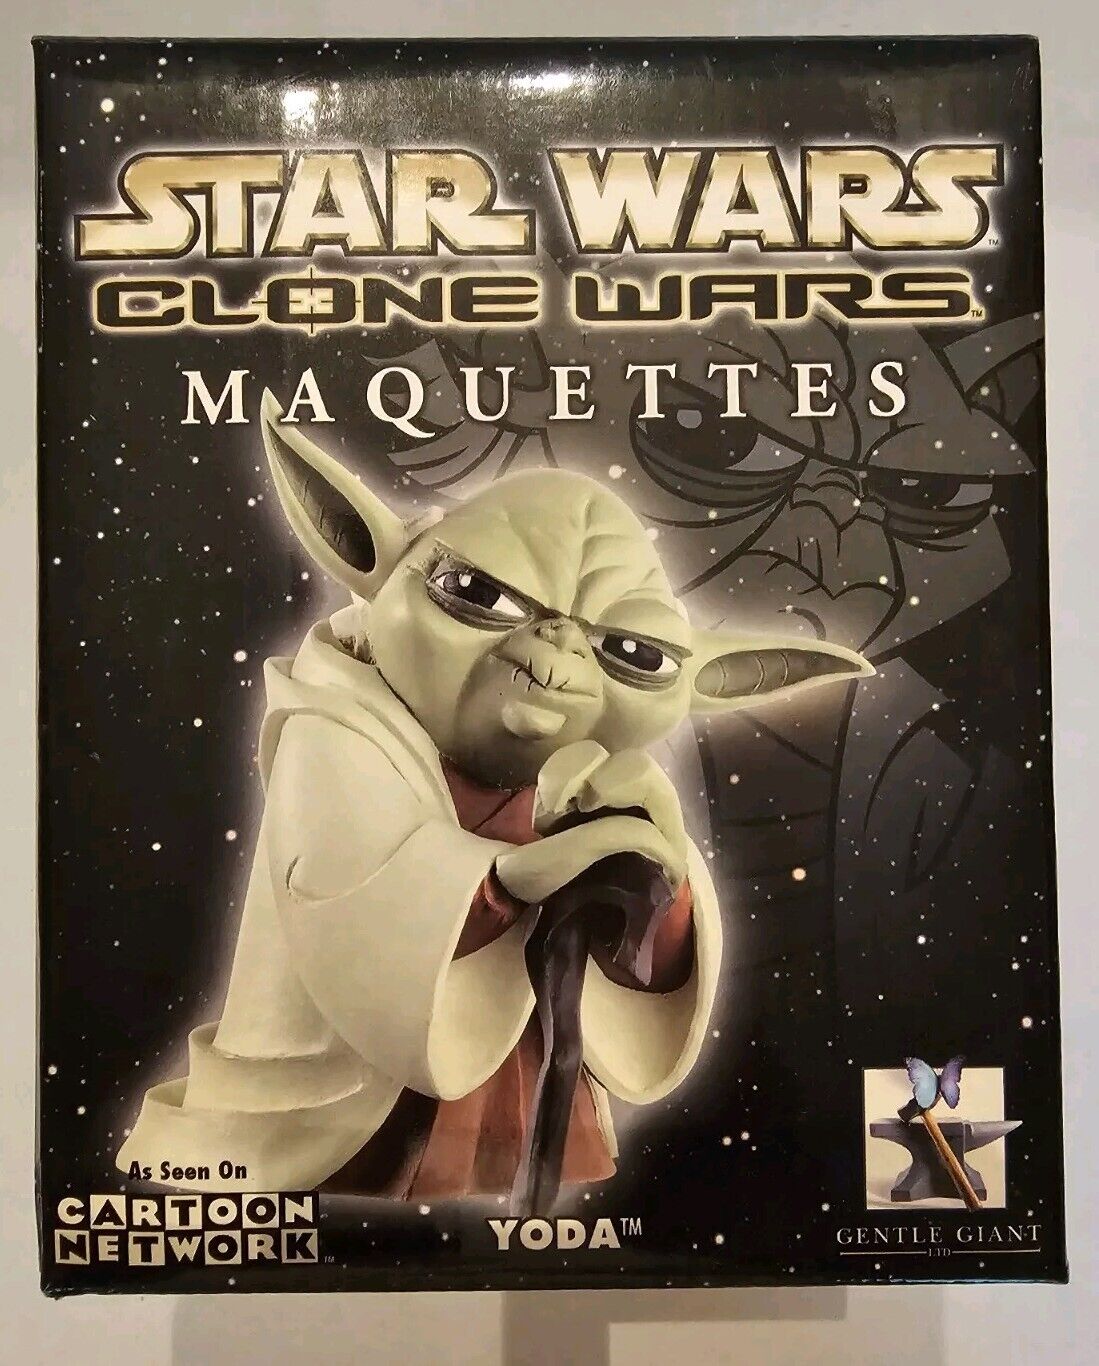 GENTLE GIANT STAR WARS Clone Wars YODA Maquette Limited Edition  of 7500